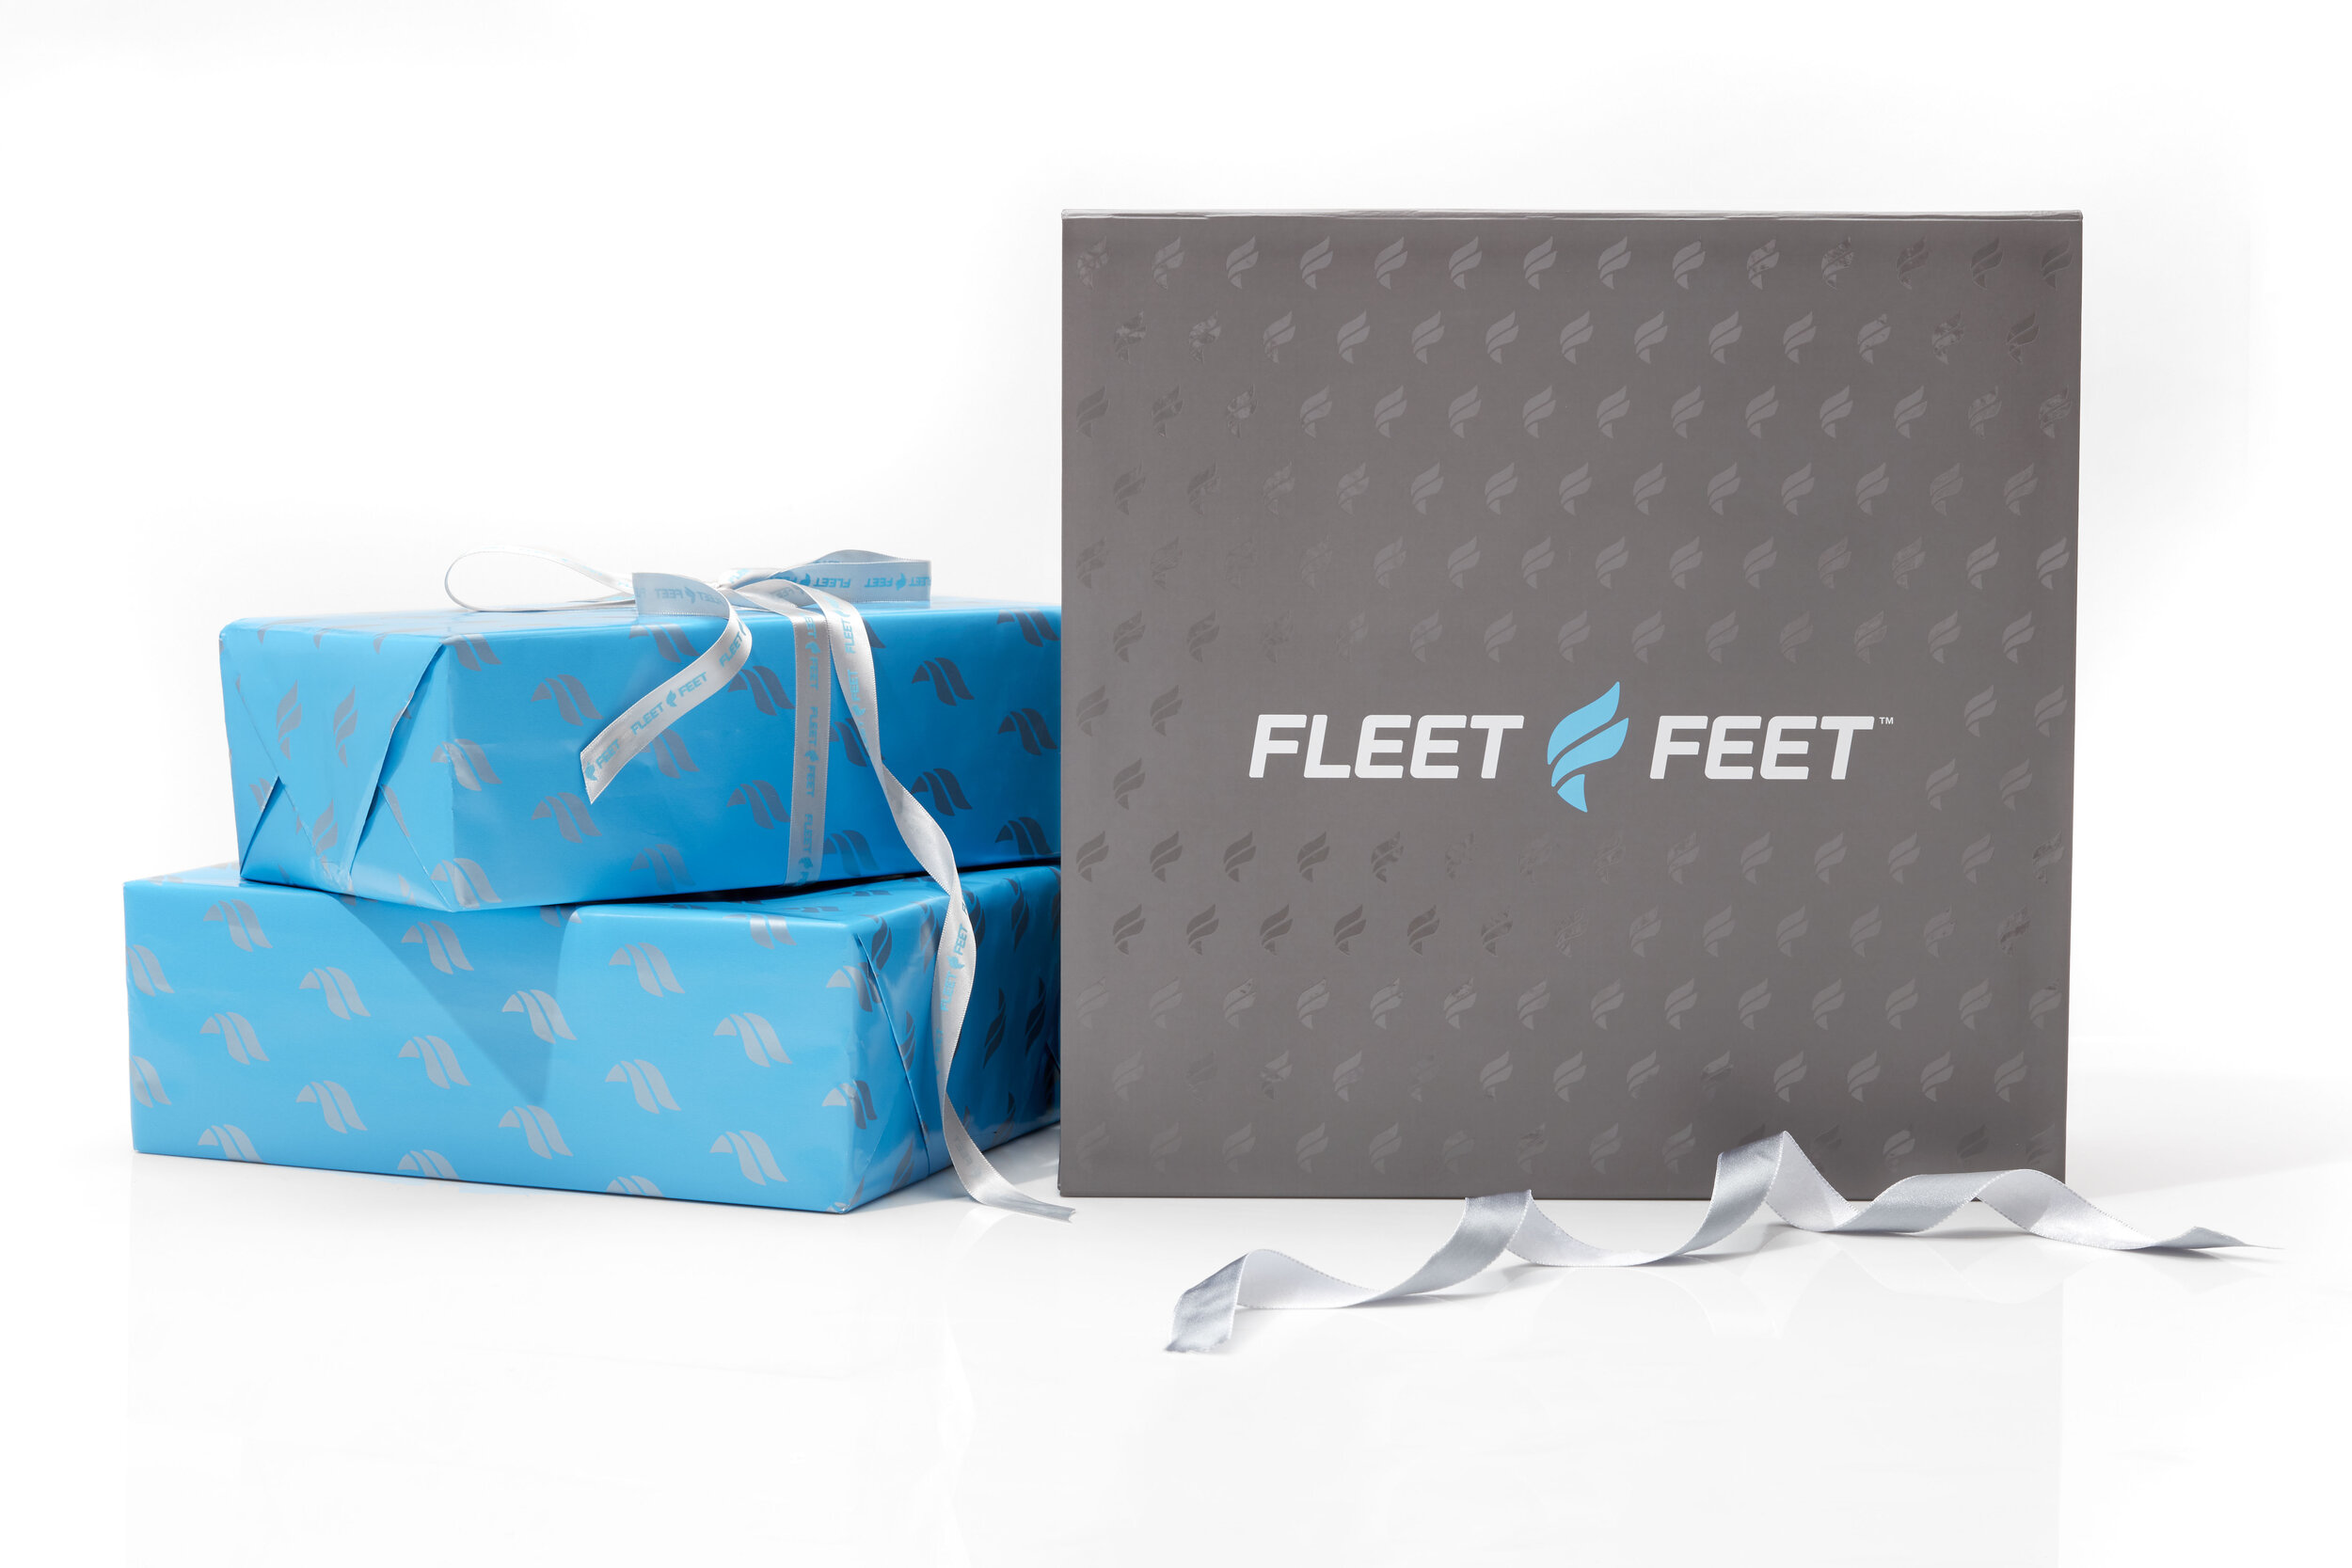 Range of FleetFeet products showcased in a group layout.